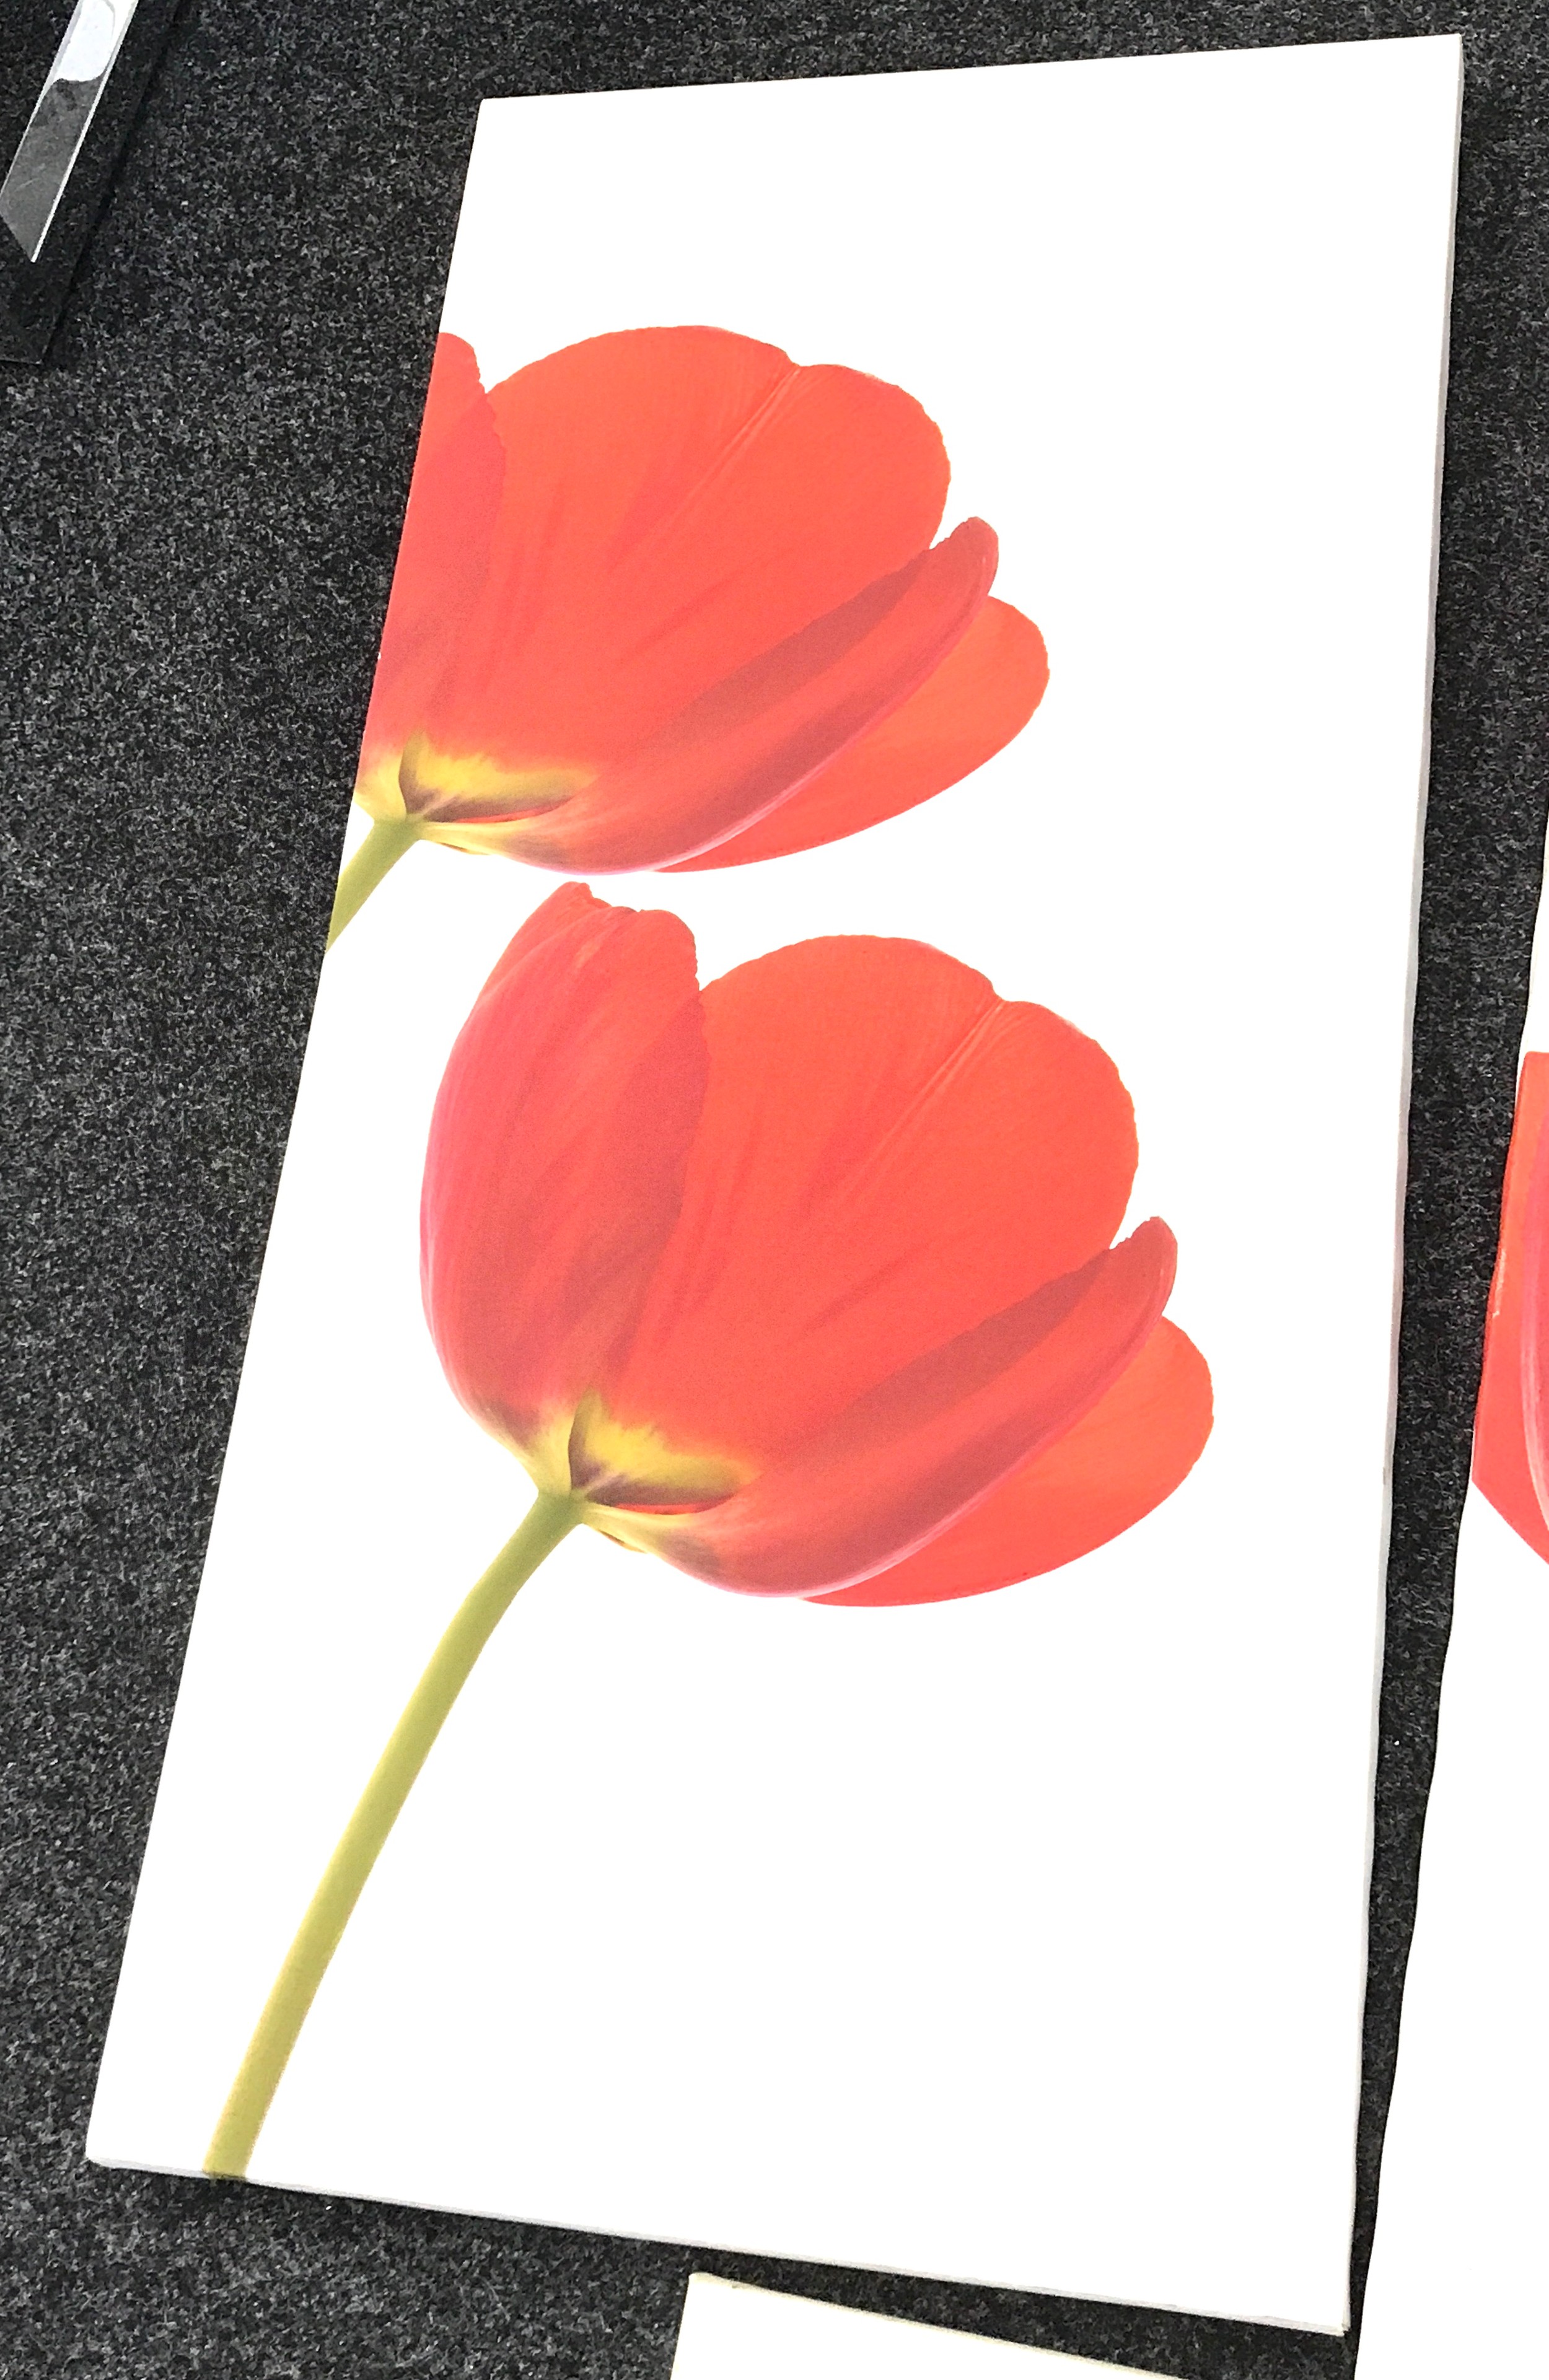 Set of three poppy scene canvases measures approximately 43 inches tall 21 inches wide - Image 3 of 3